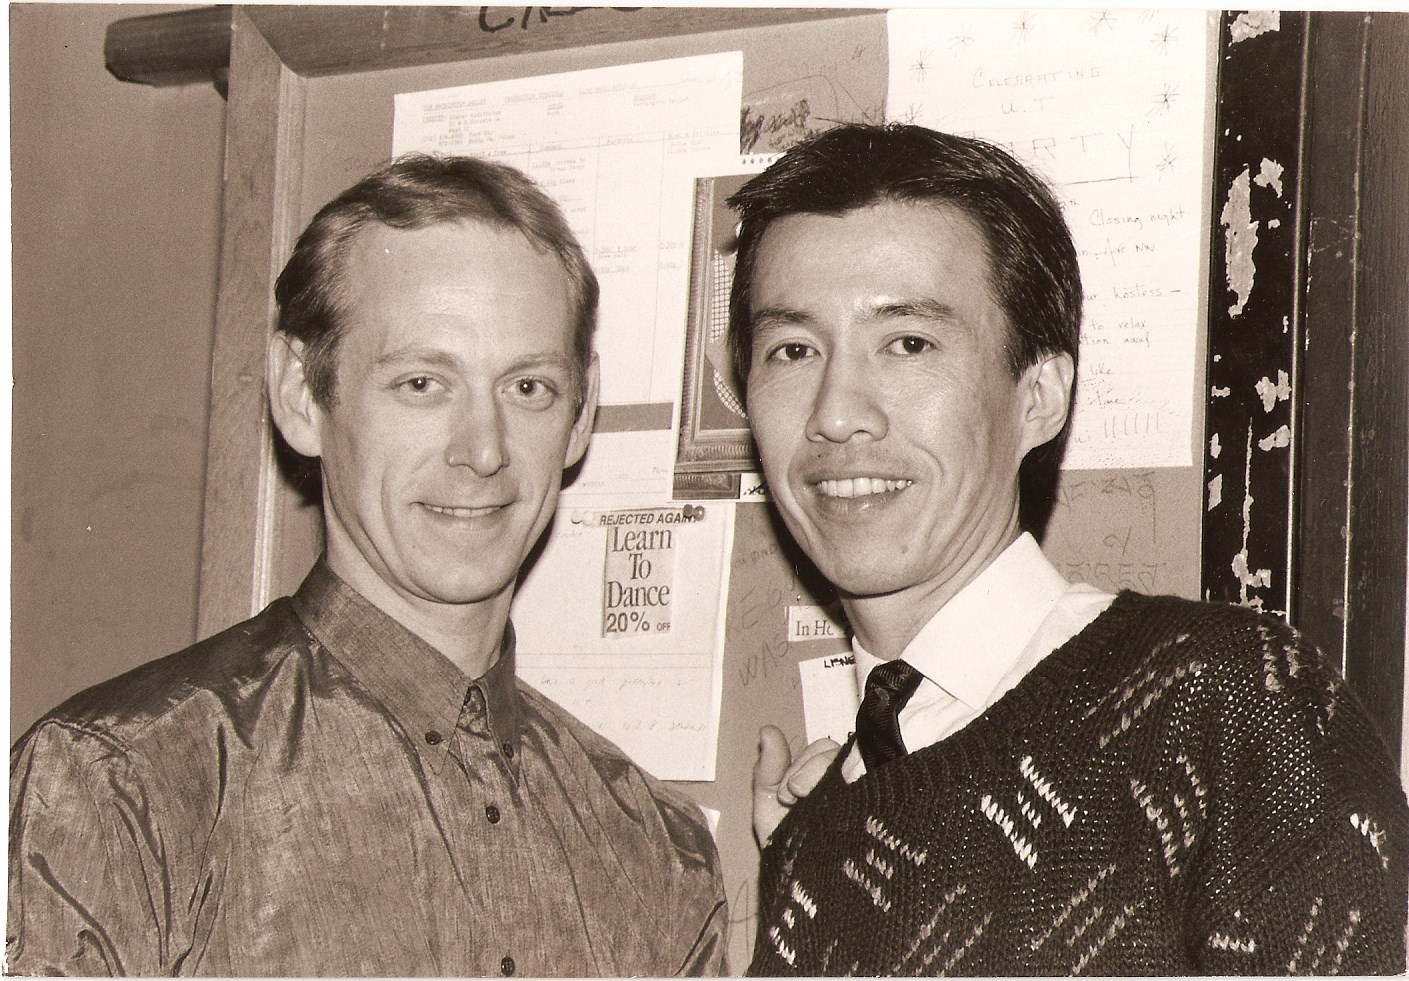 A sepia close-up shows Janek Schergen and Choo San Goh smiling together, pictured chest-up.